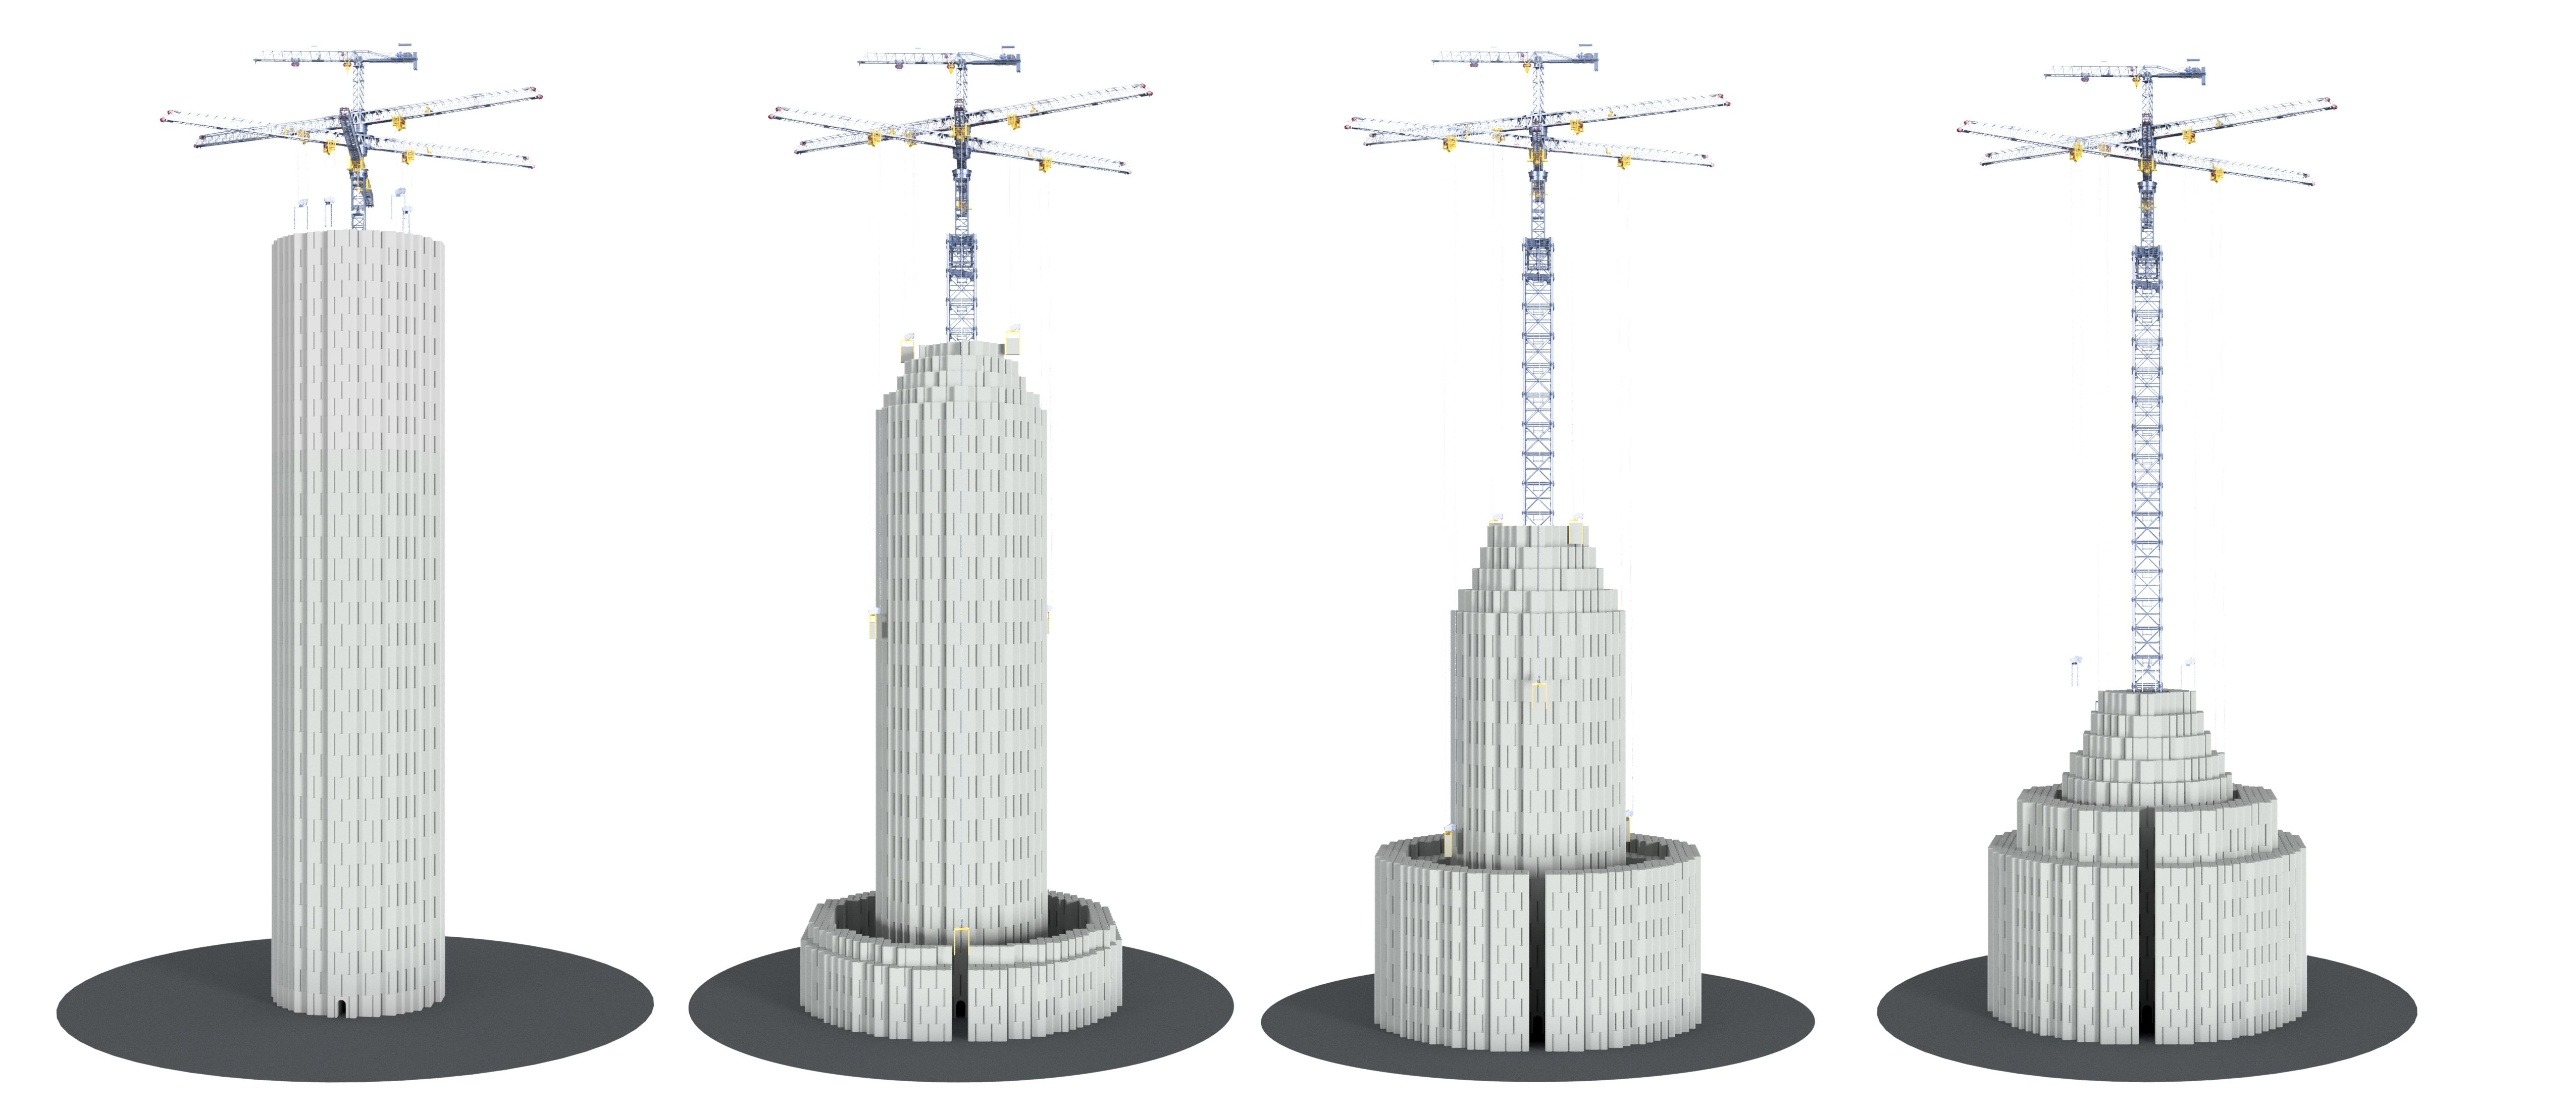 From left to right, Energy Vault’s tower fully “charged,” at partial levels of charge, and with its capacity fully expended. Source: Energy Vault